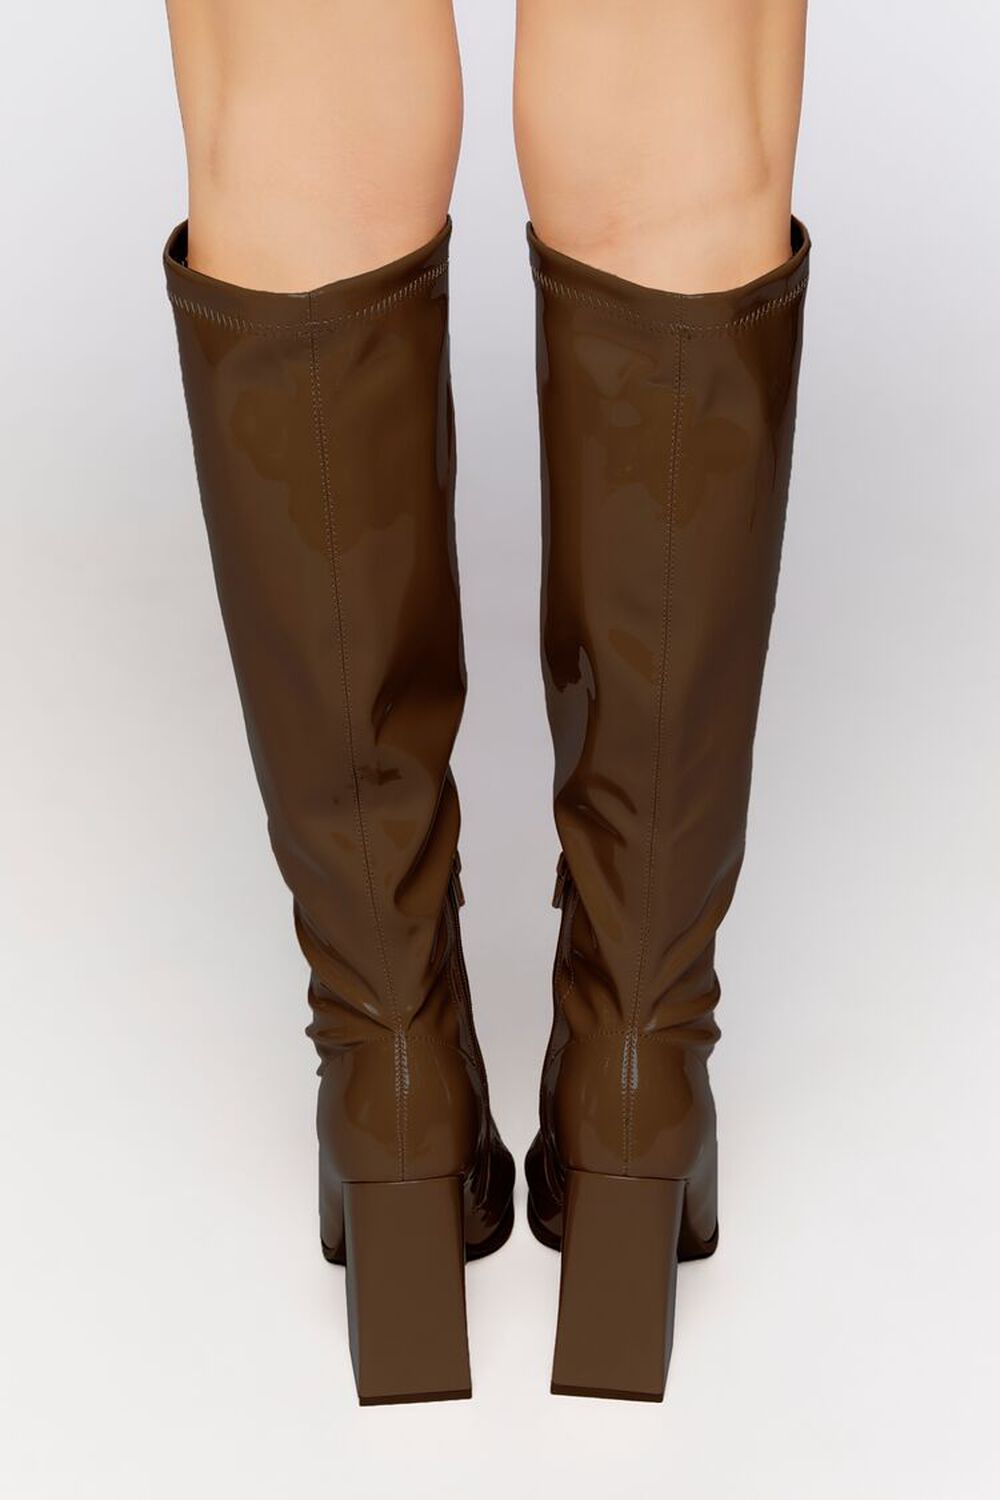 Faux Patent Leather Knee-High Boots, image 3